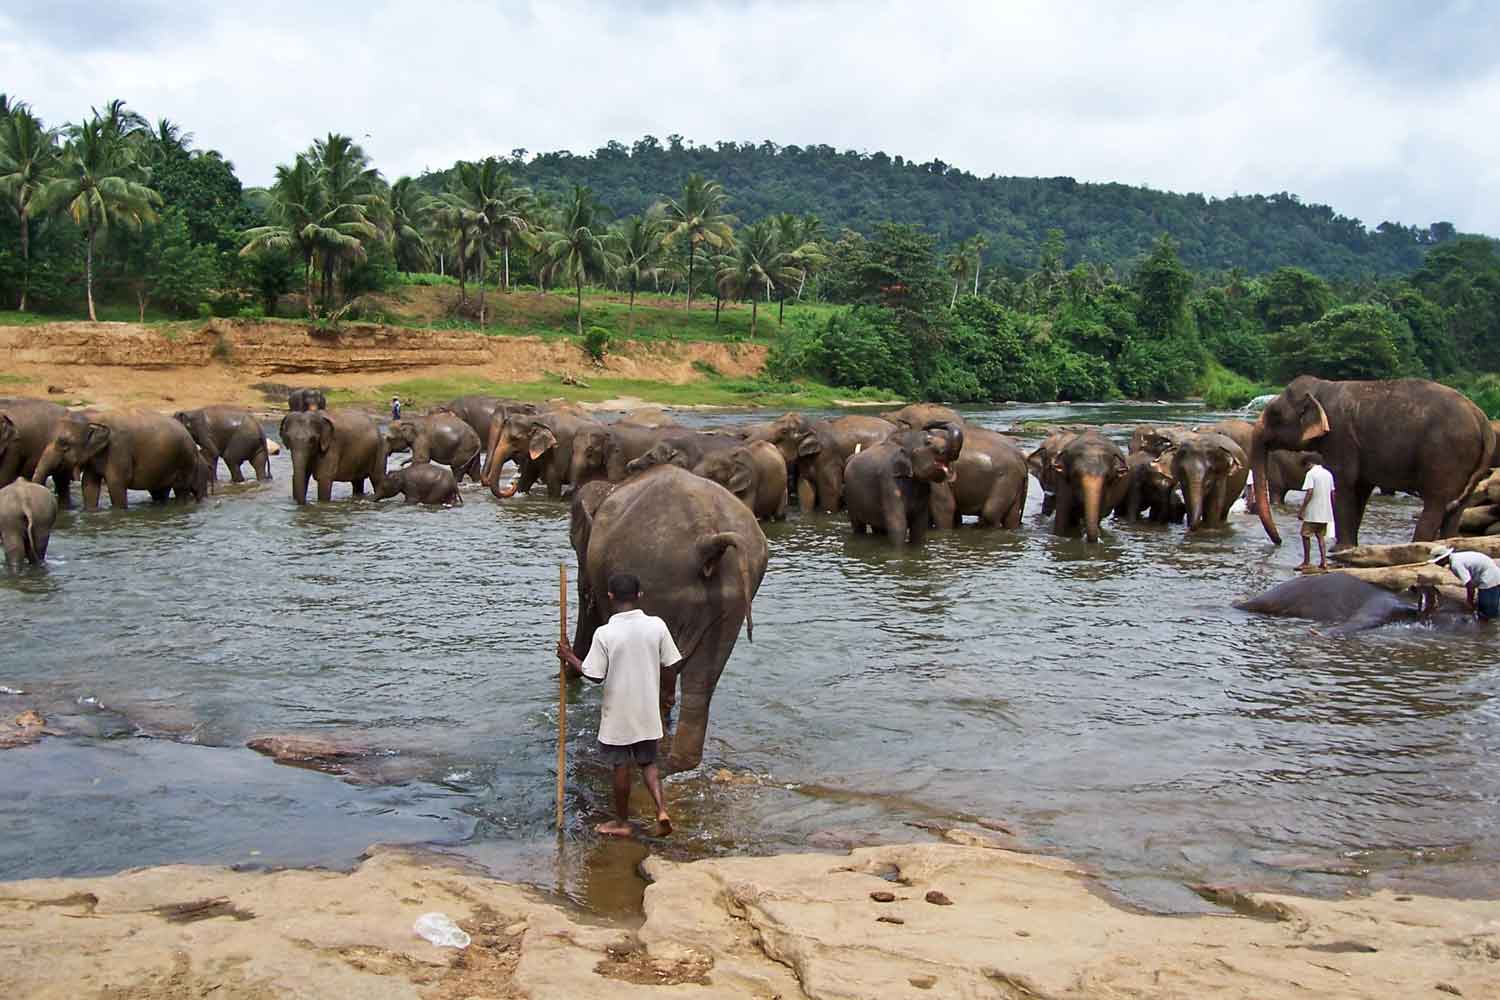 Flock of elephants in the river